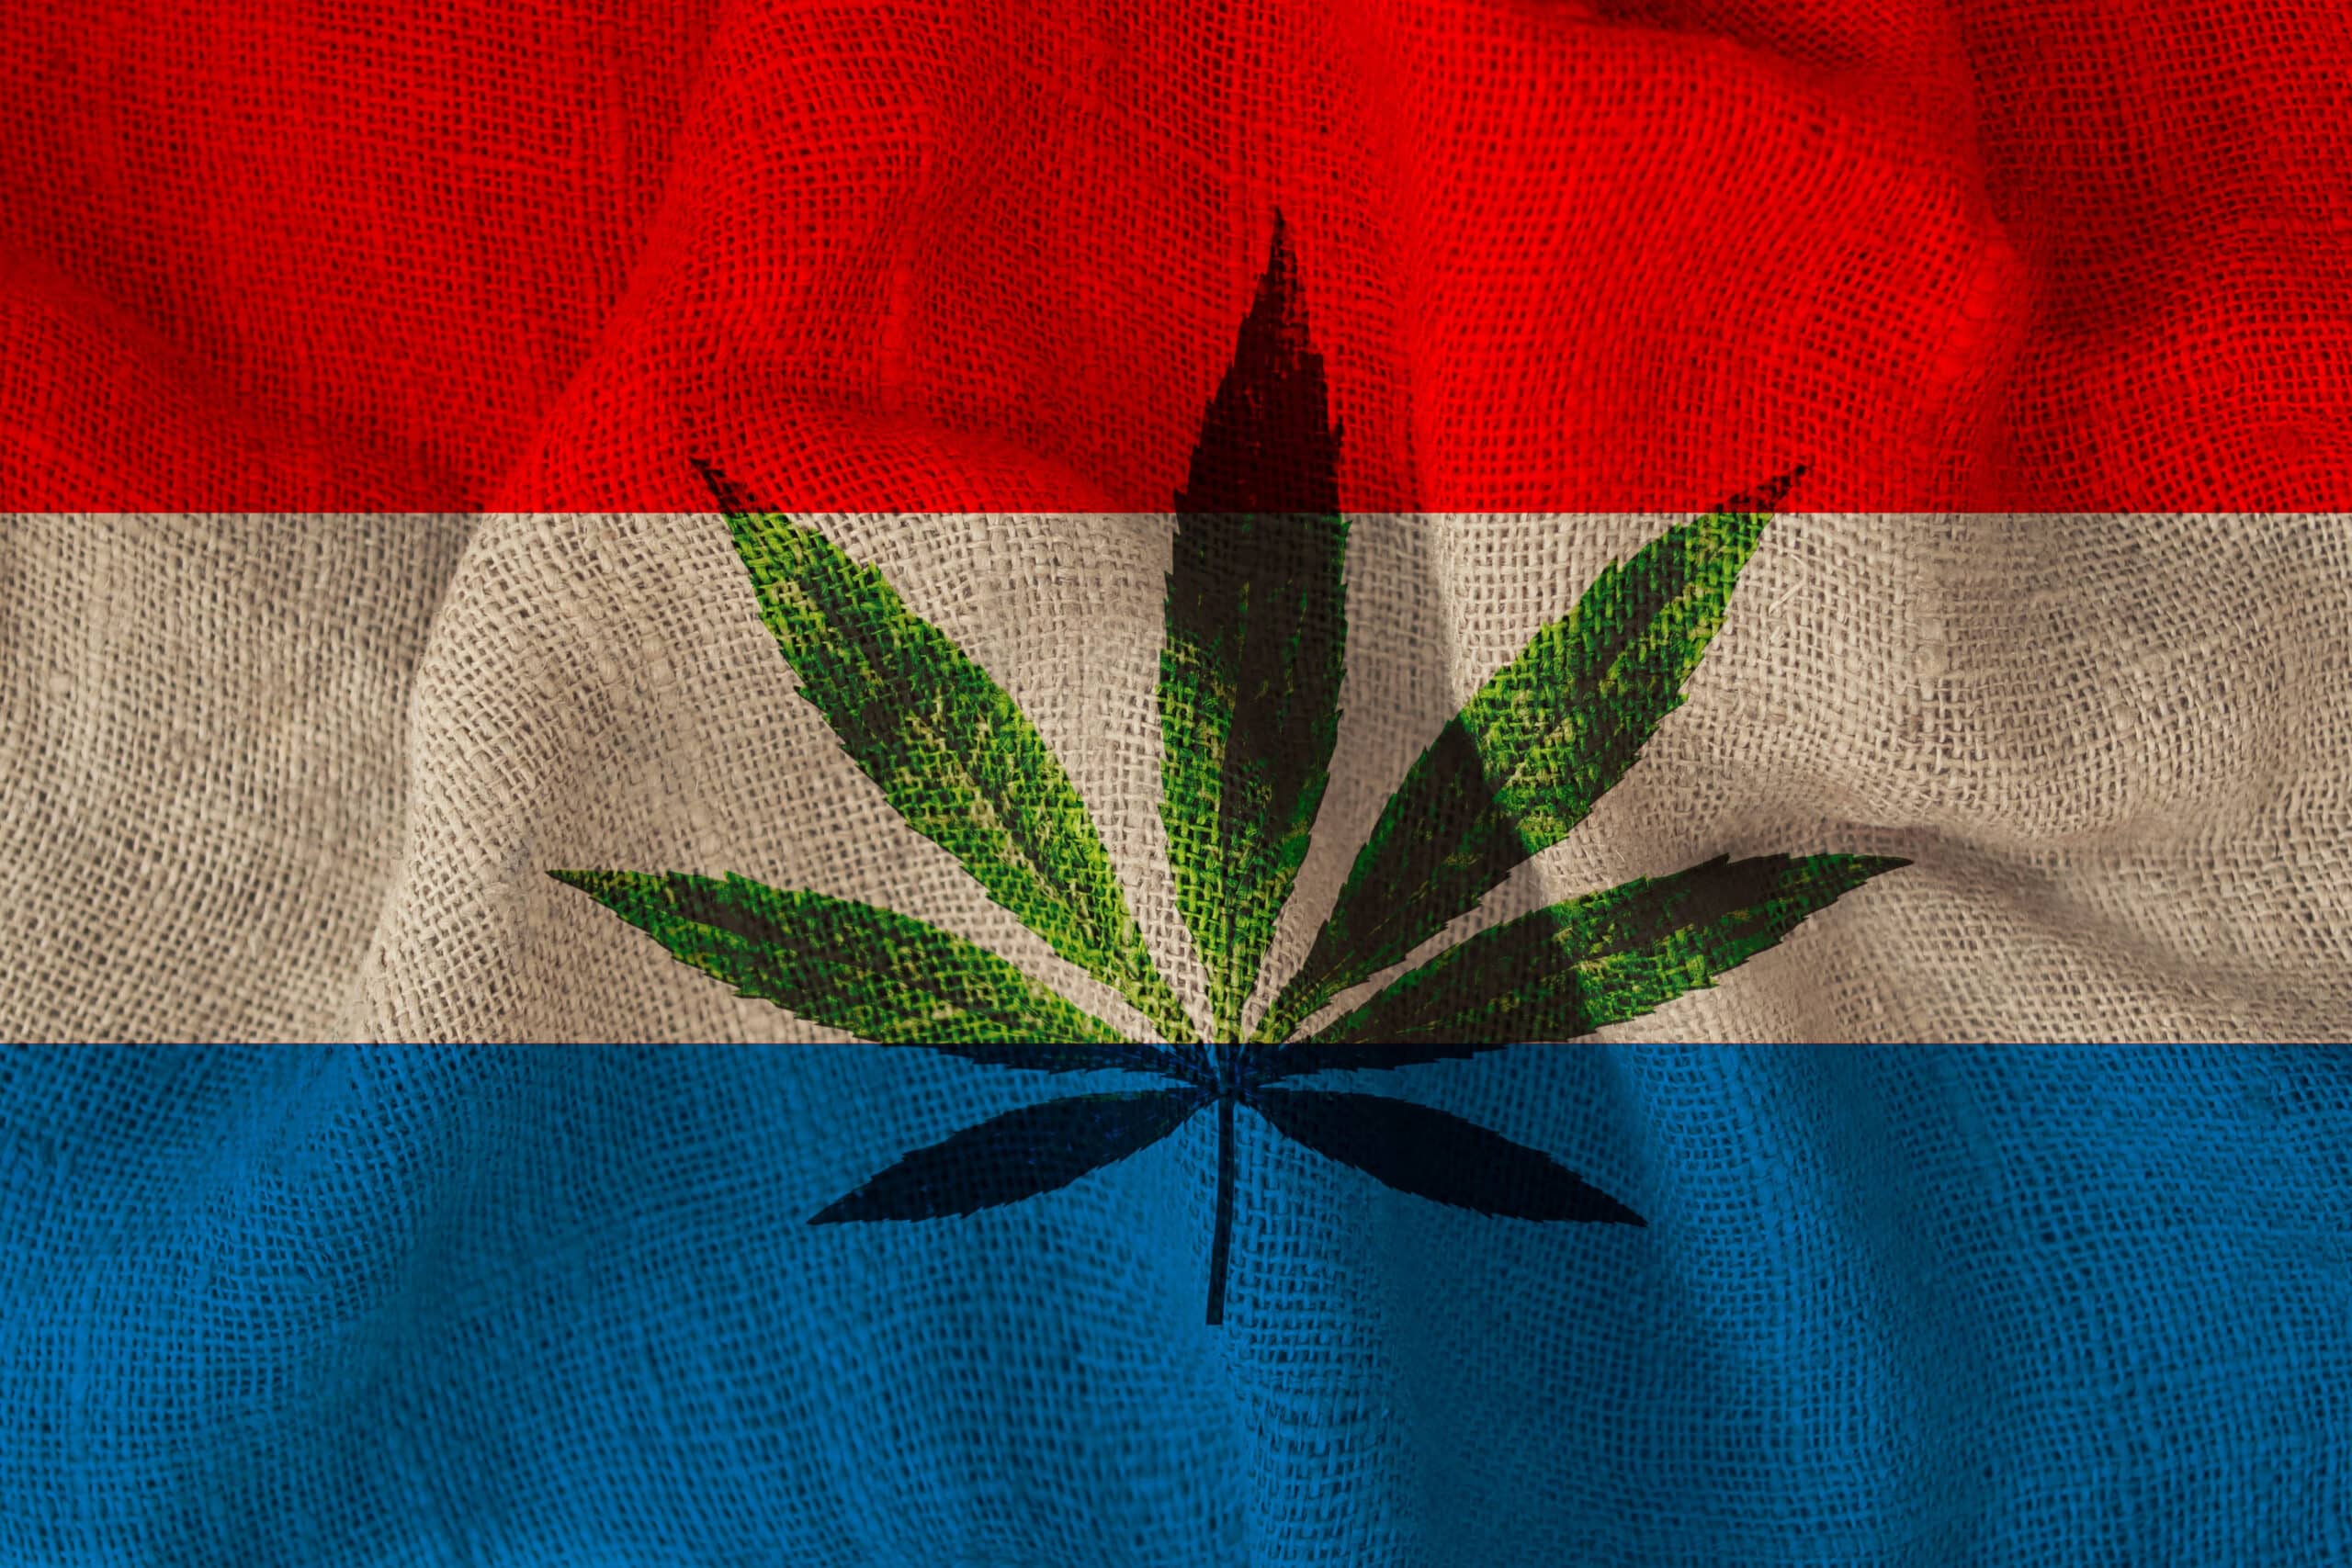 Luxembourg Legalizes Cannabis: What You Need to Know